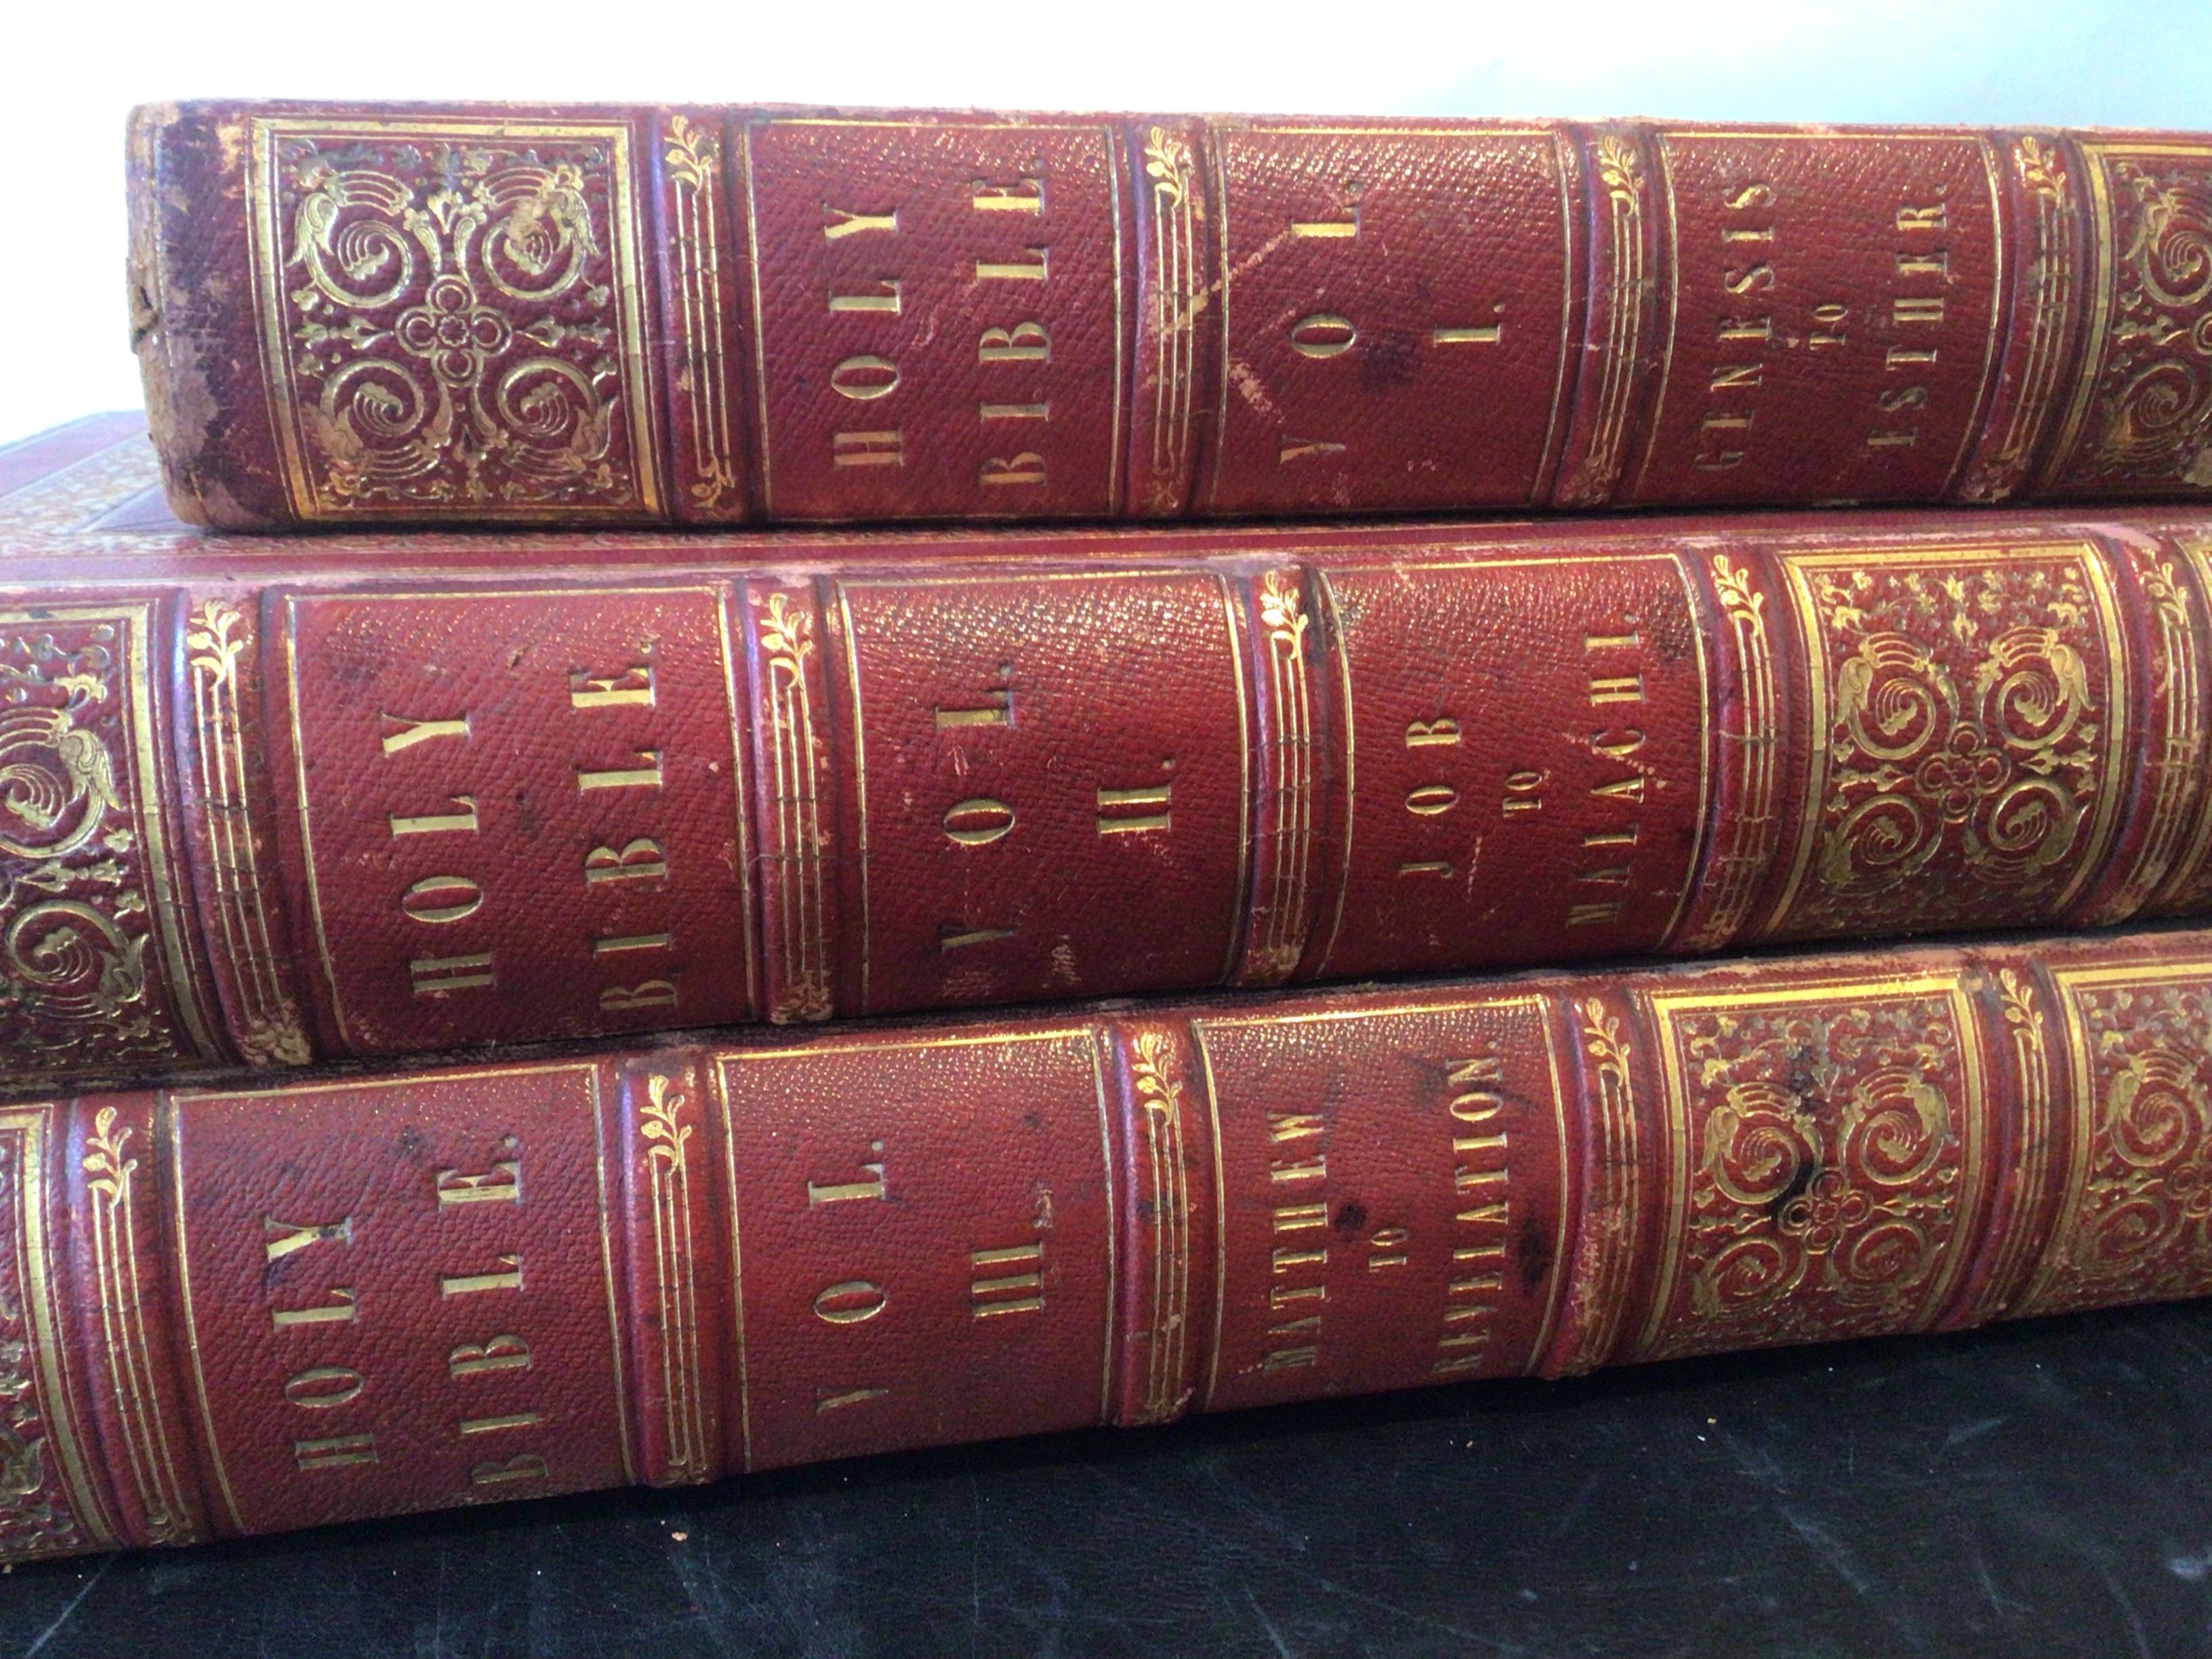 1820s 3 Volume Family Bible Commentary by Mathew Henry In Good Condition For Sale In Tarrytown, NY